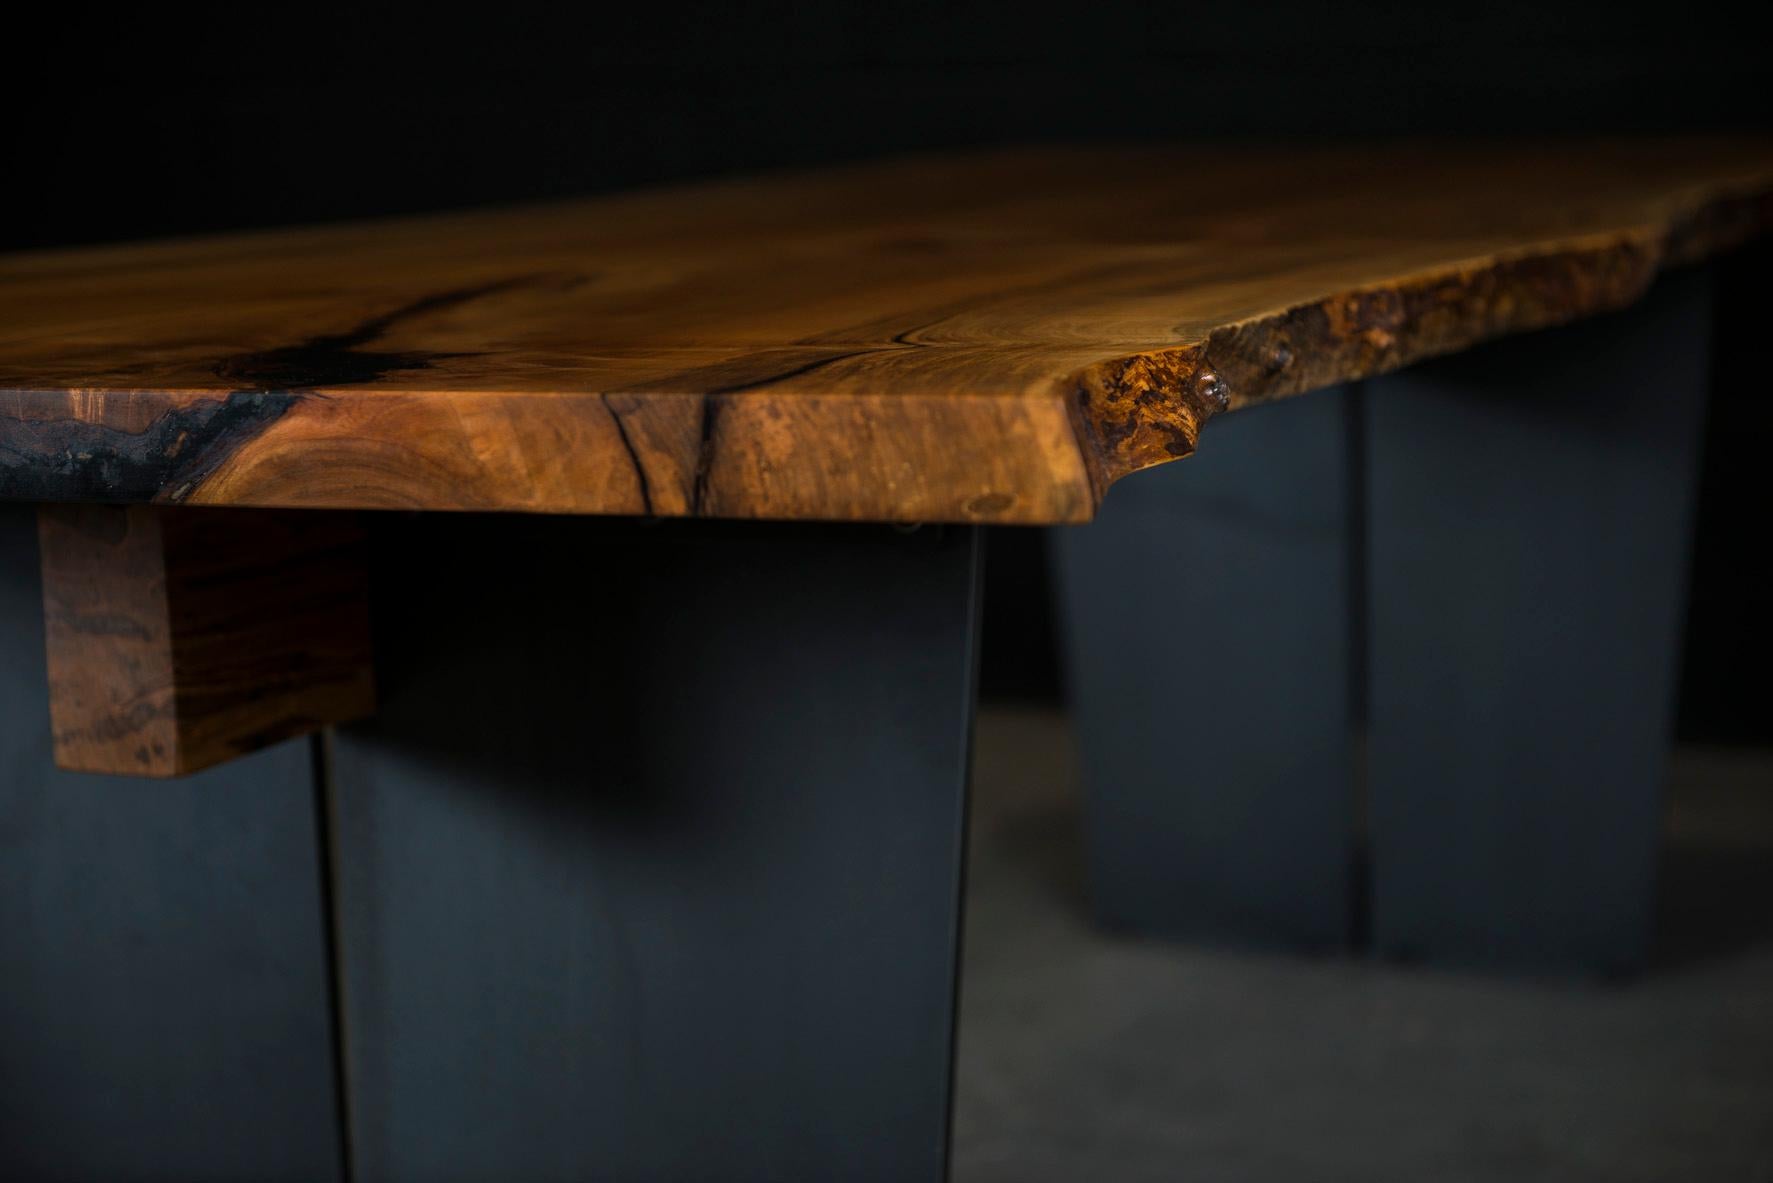 Our Cadelon live edge dining table is handmade to order from a one-of-kind silver maple slab with a hand rubbed natural oil and wax finish that enhance the real beauty of the wood and give a natural warm touch. The elegant style came from our